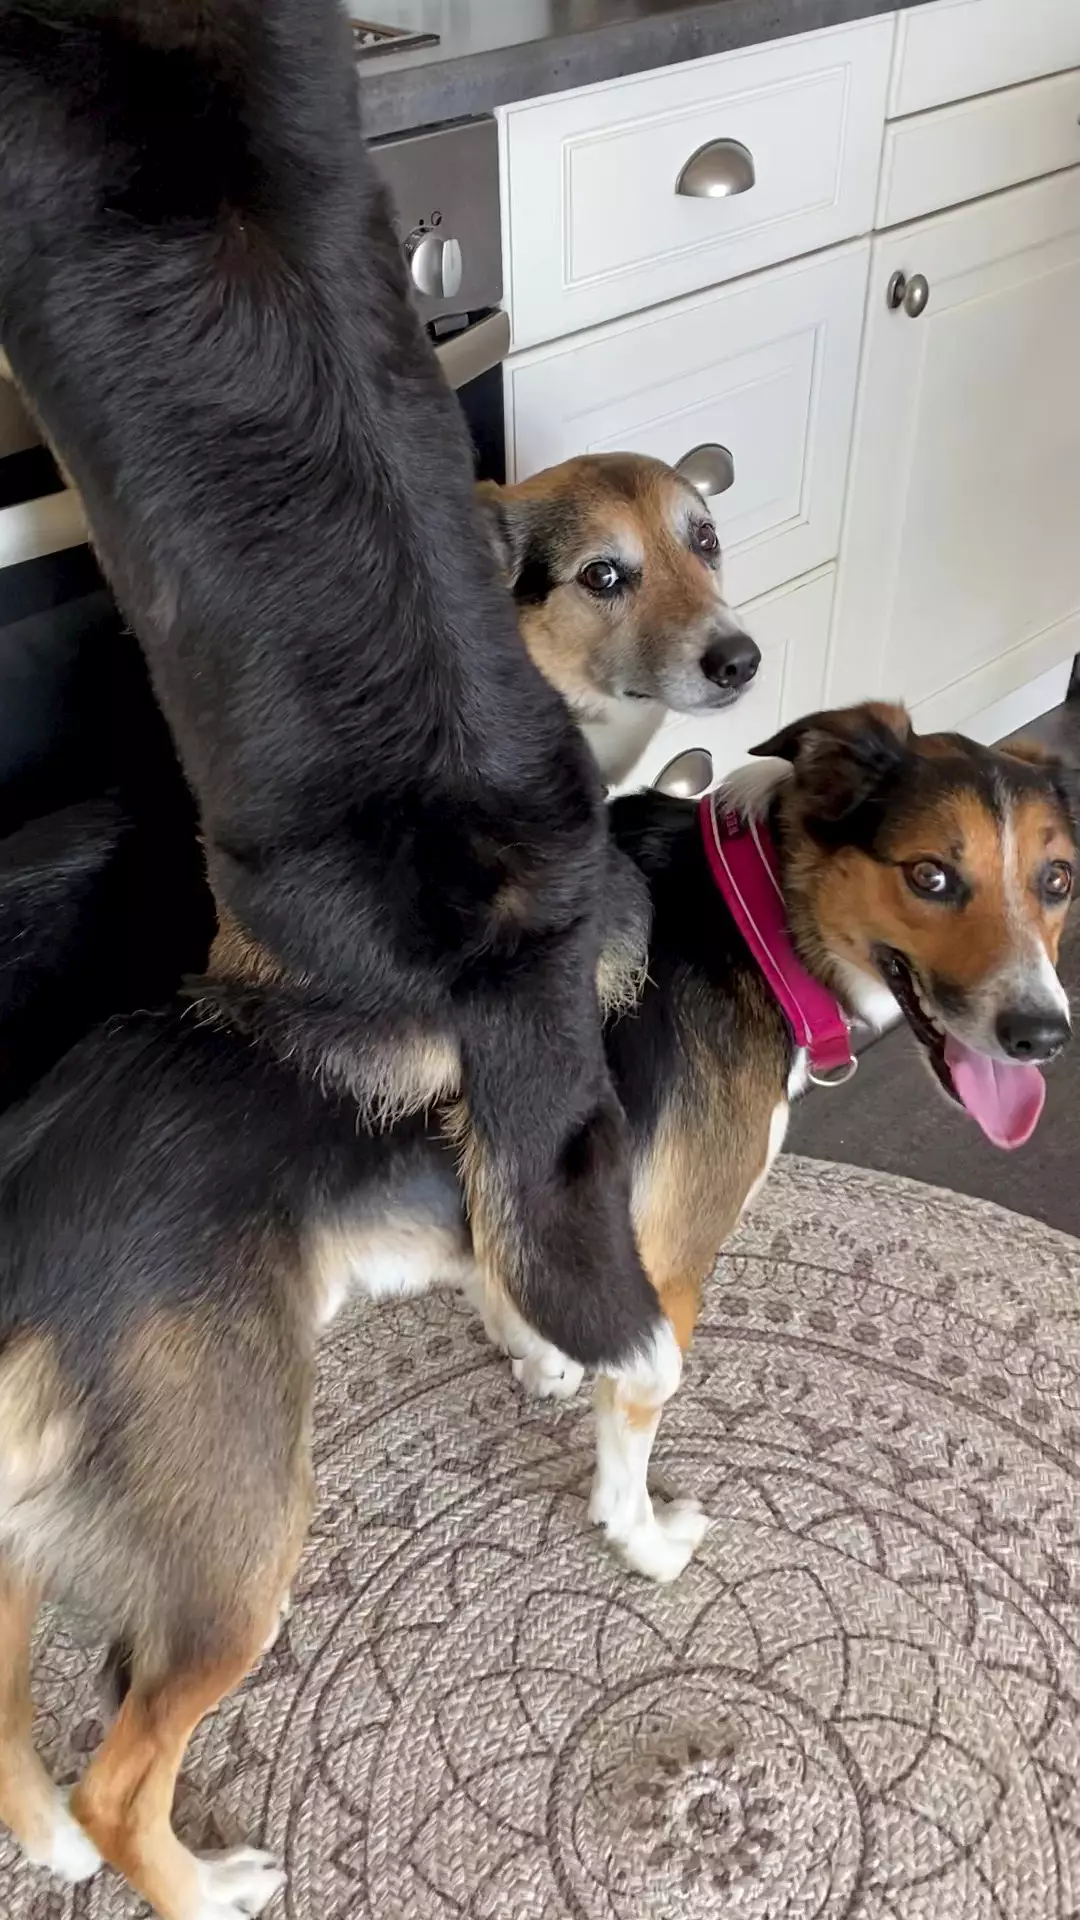 The doggos acted as foot-stools (